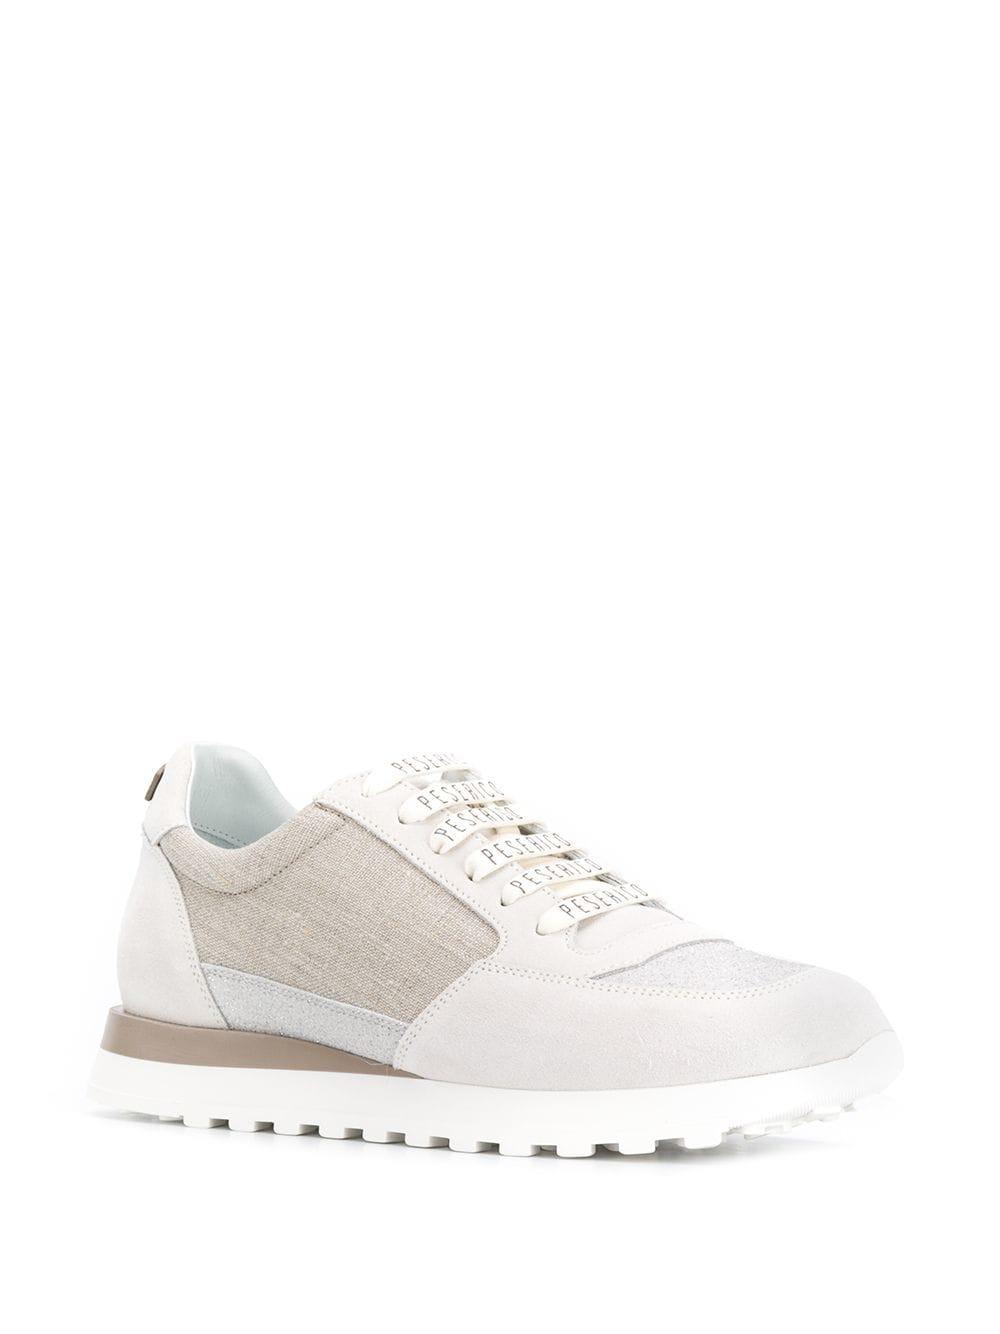 Lyst - Peserico Lace-up Sneakers in White